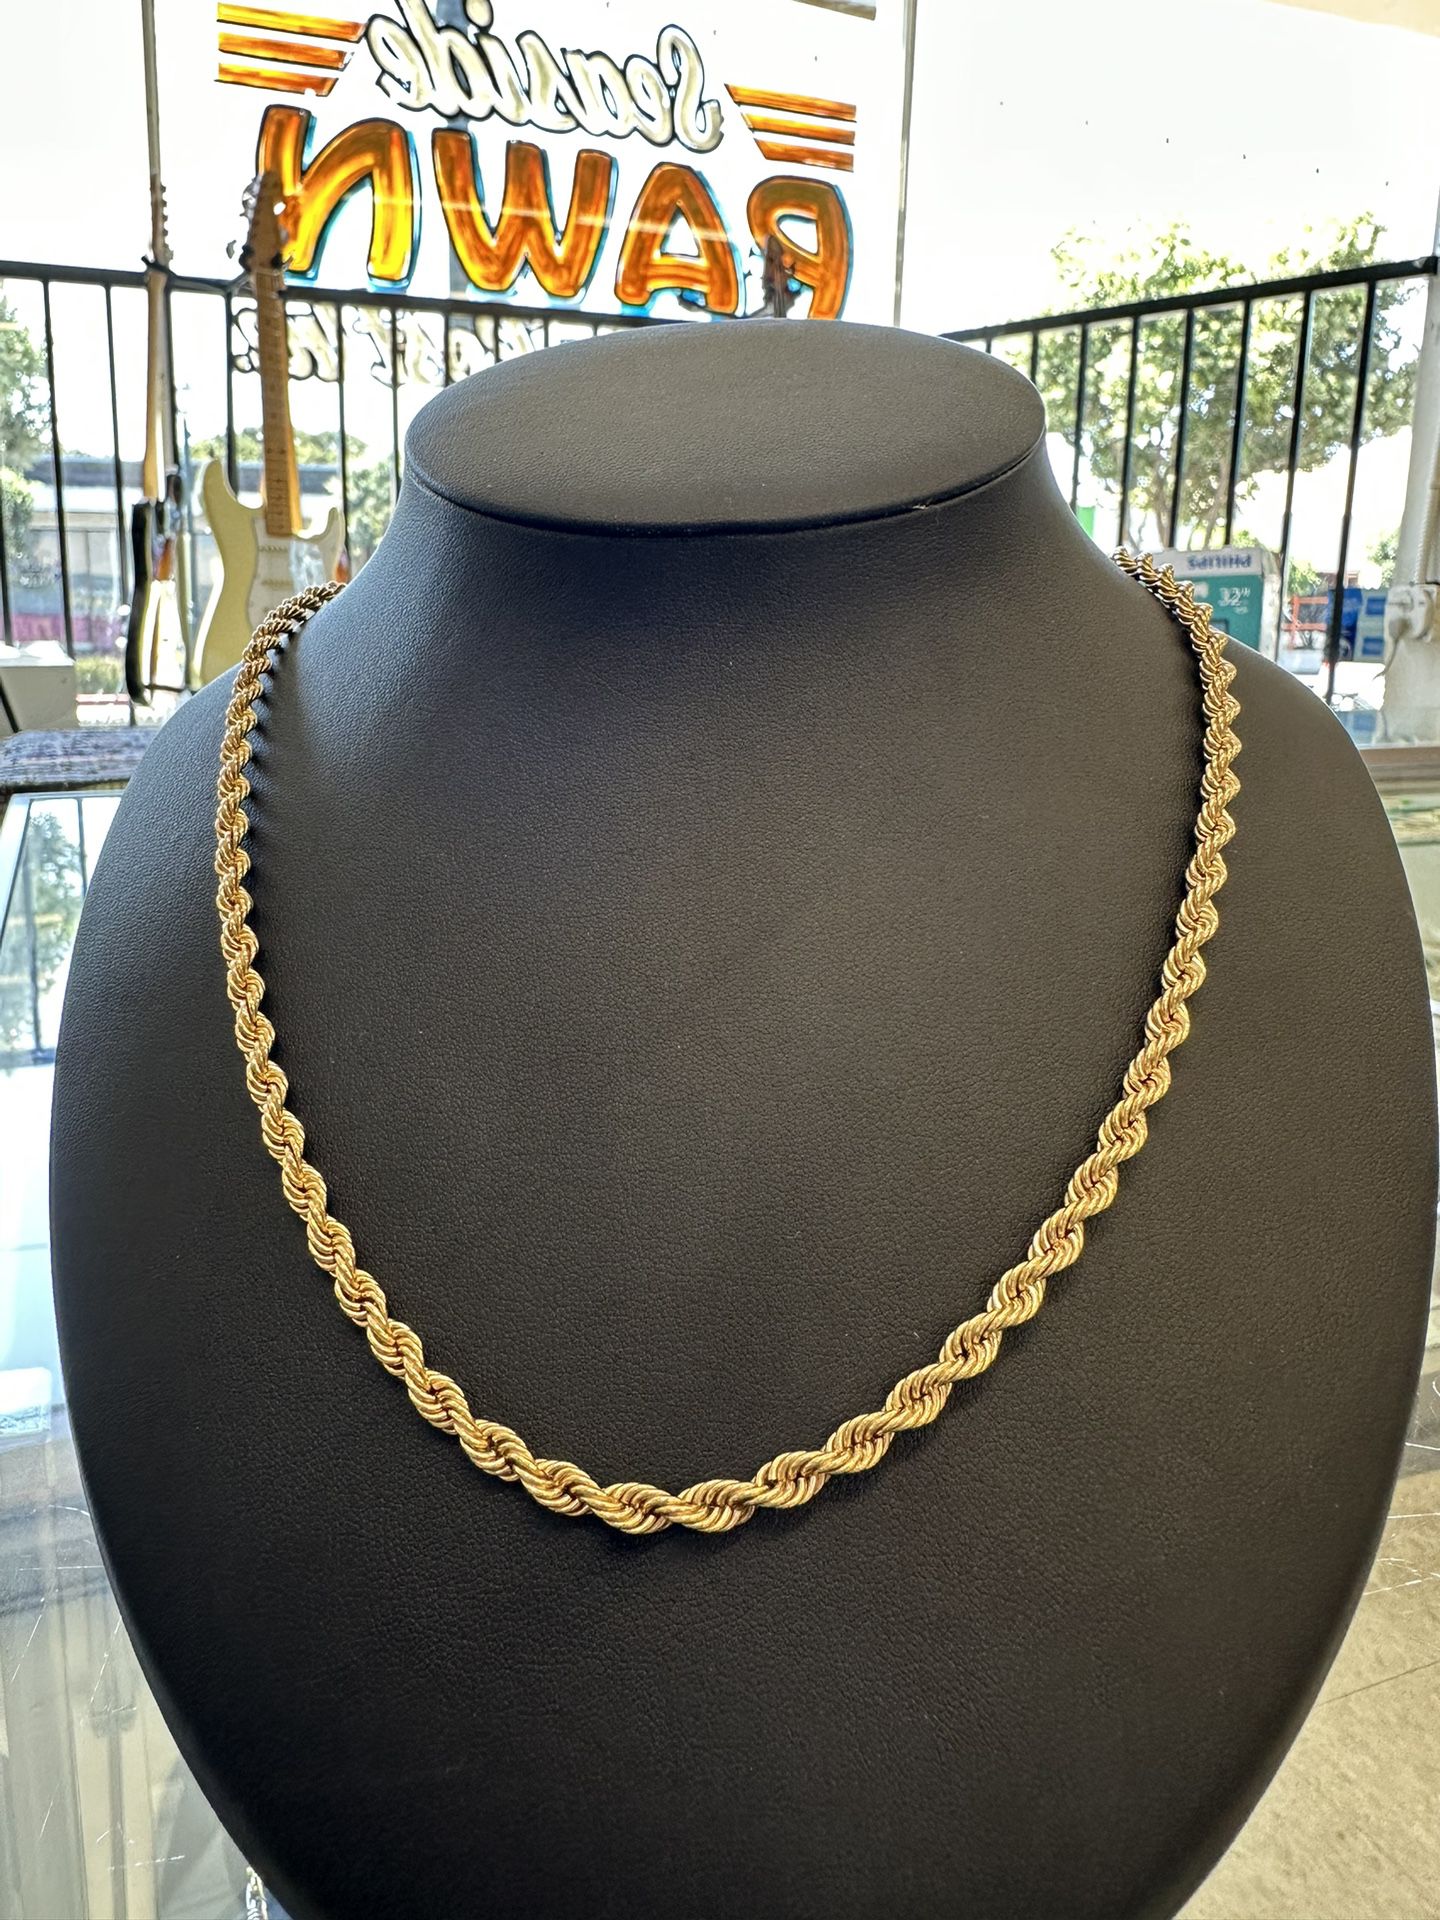 Rope Chain Yellow Gold 14Kt 